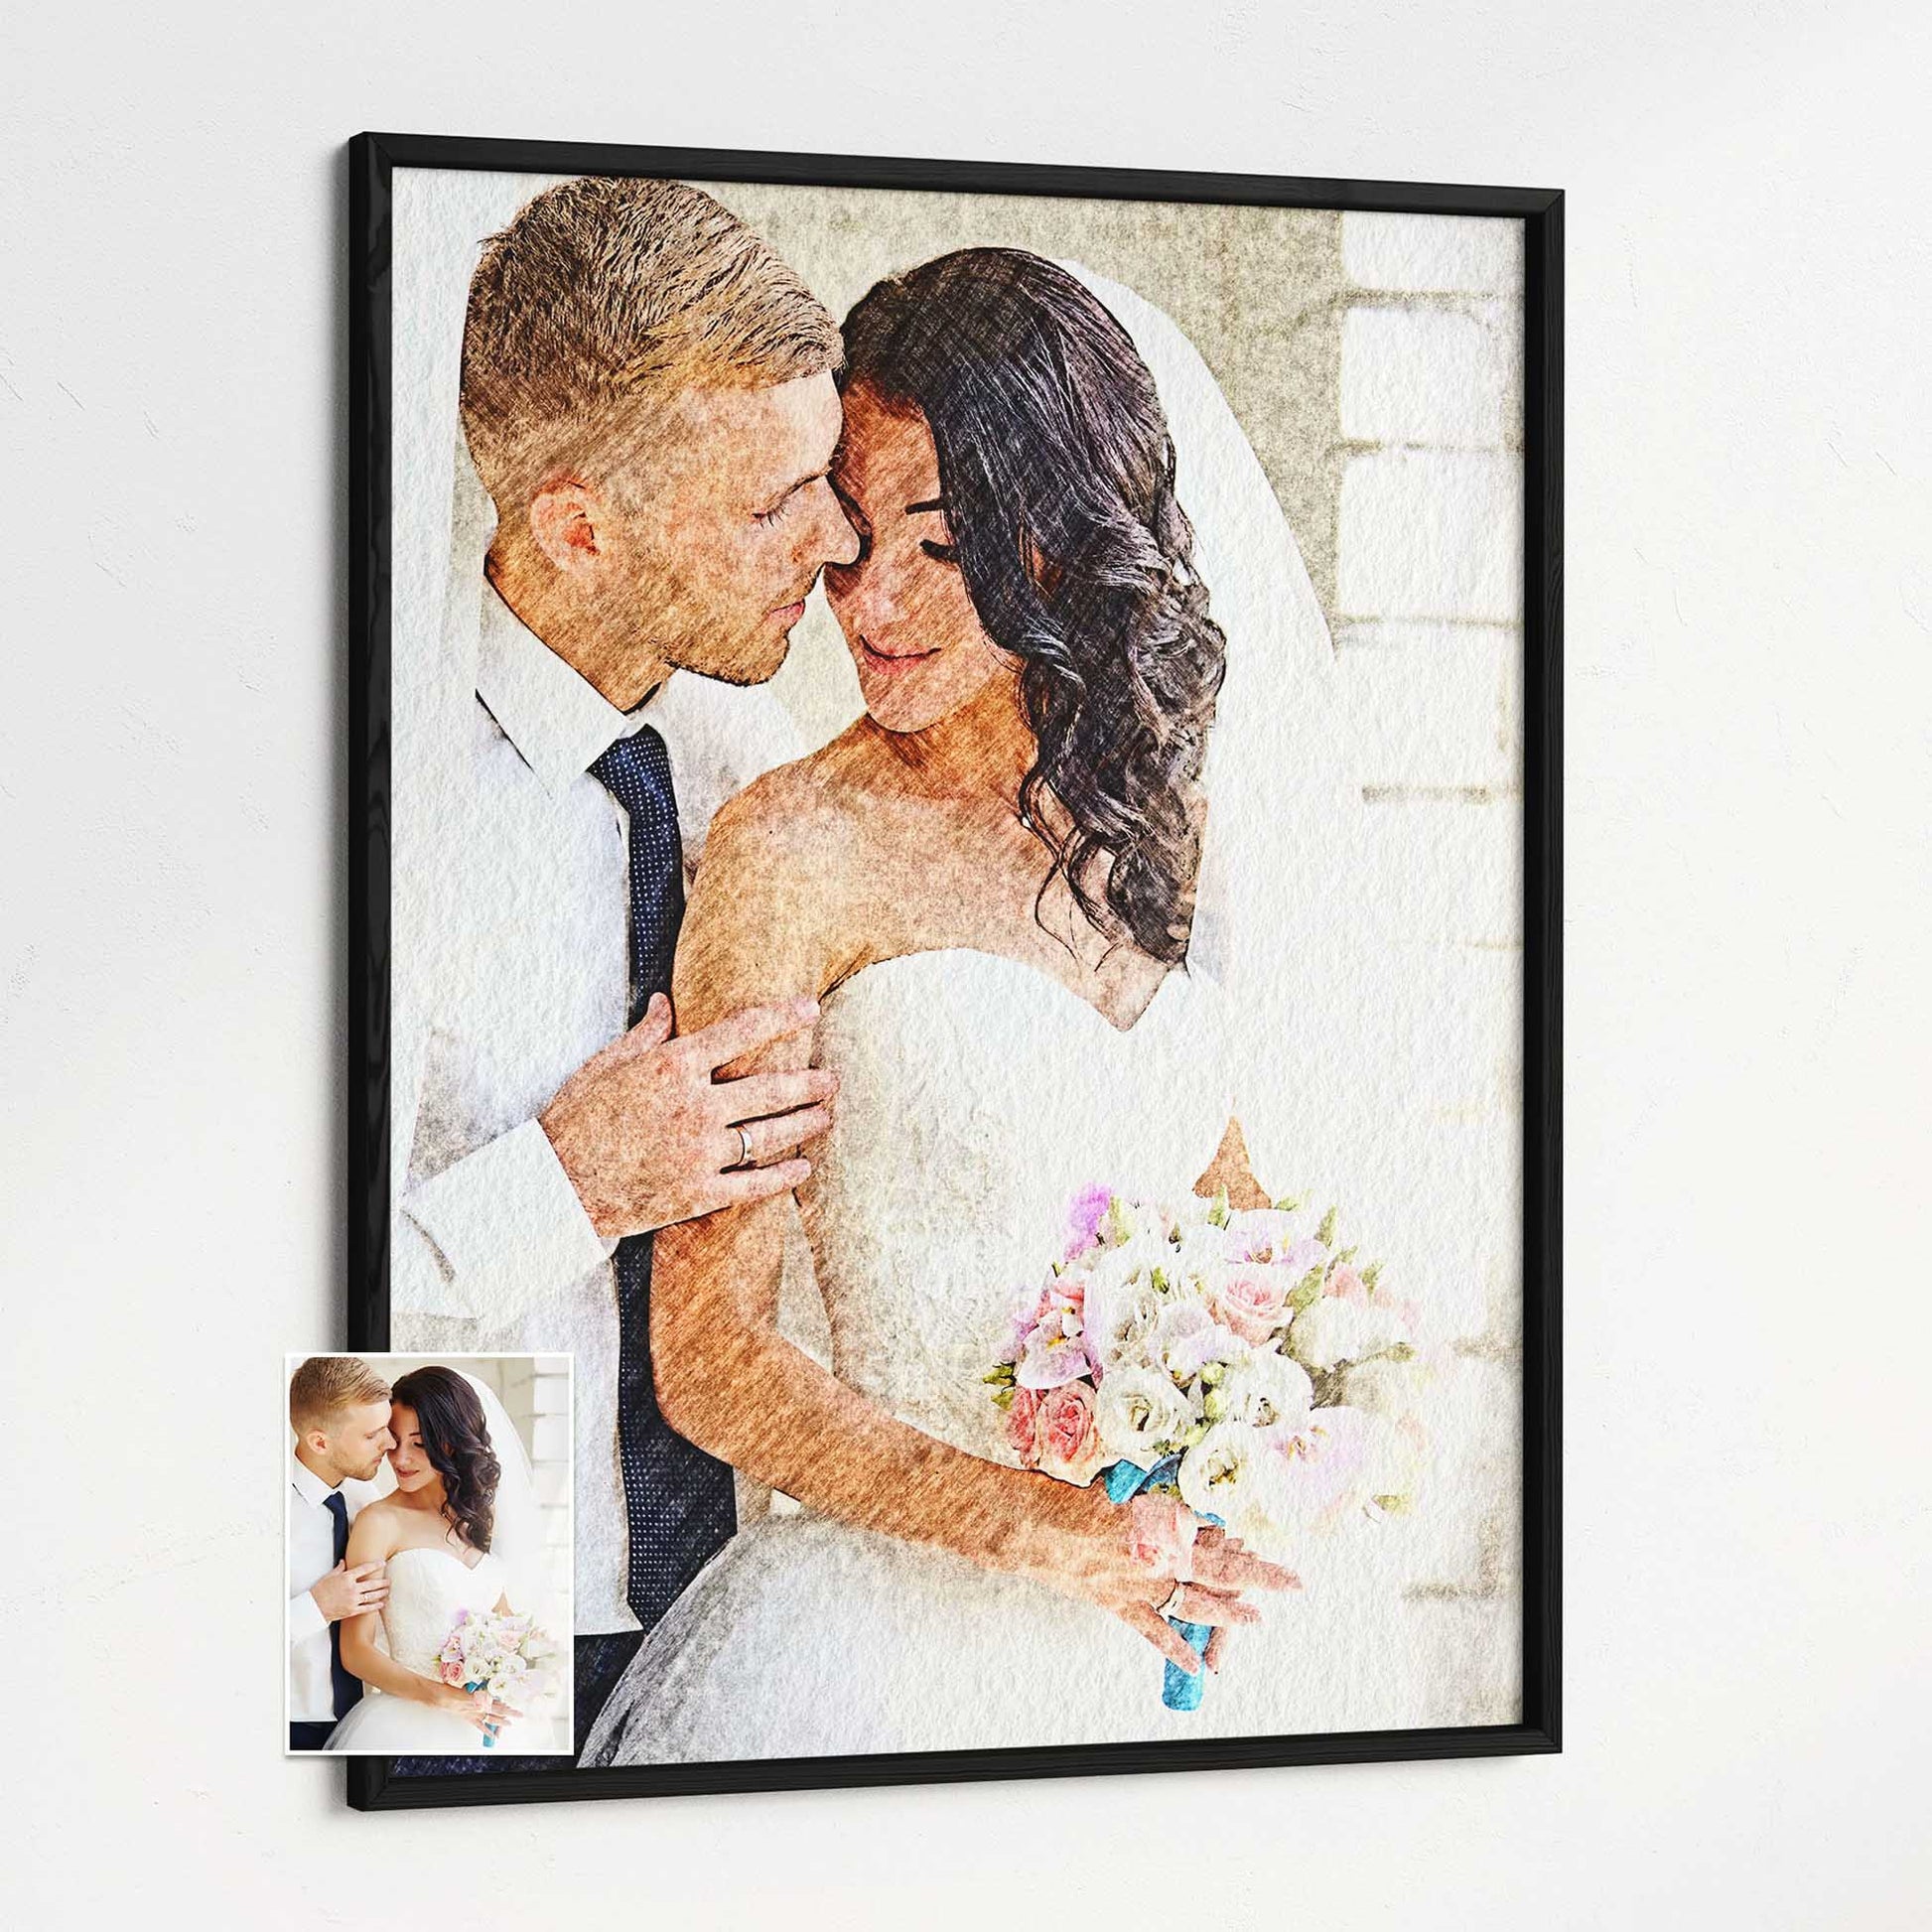 Chic and Stylish: Elevate your decor with a personalised fabric texture framed print. The authentic and natural look of the painting from a photo technique adds a touch of elegance to any space. Encased in a gallery-quality wooden frame